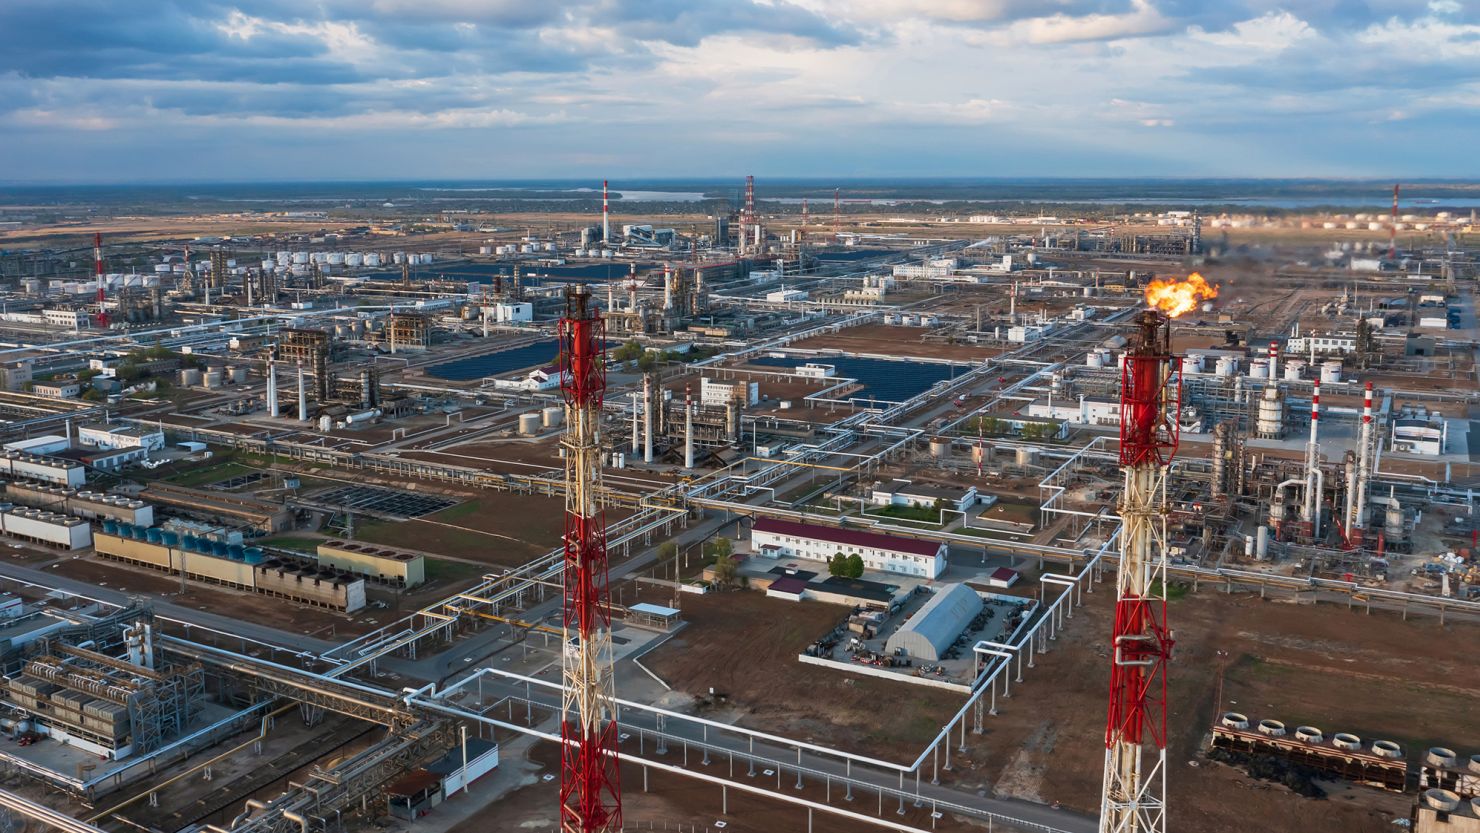 Lukoil's board of directors has called for an end to Russia's war in Ukraine.